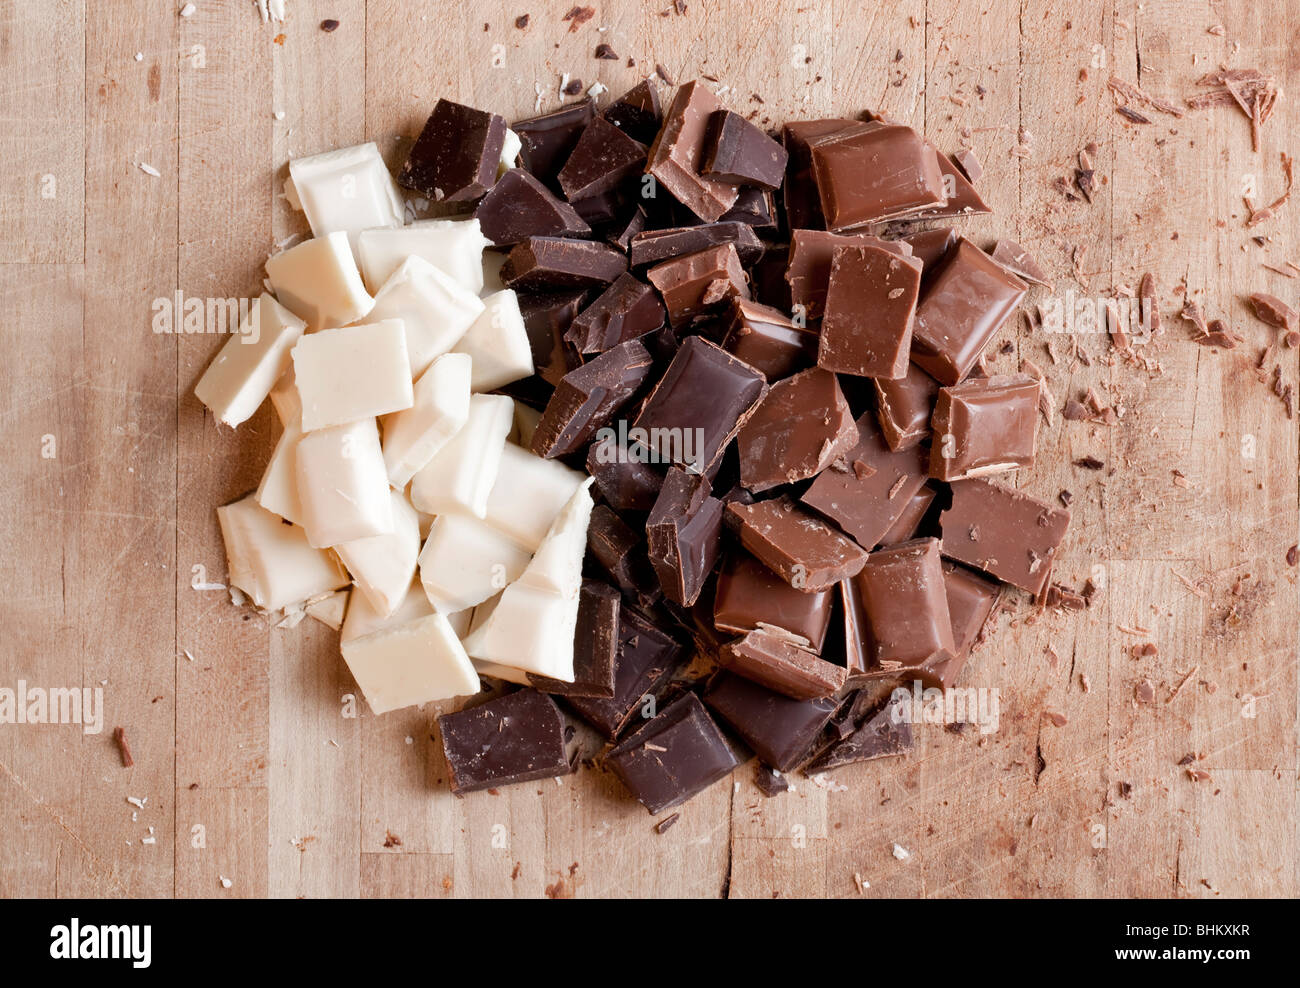 Many flavors of chocolate chopped up ready for use Stock Photo